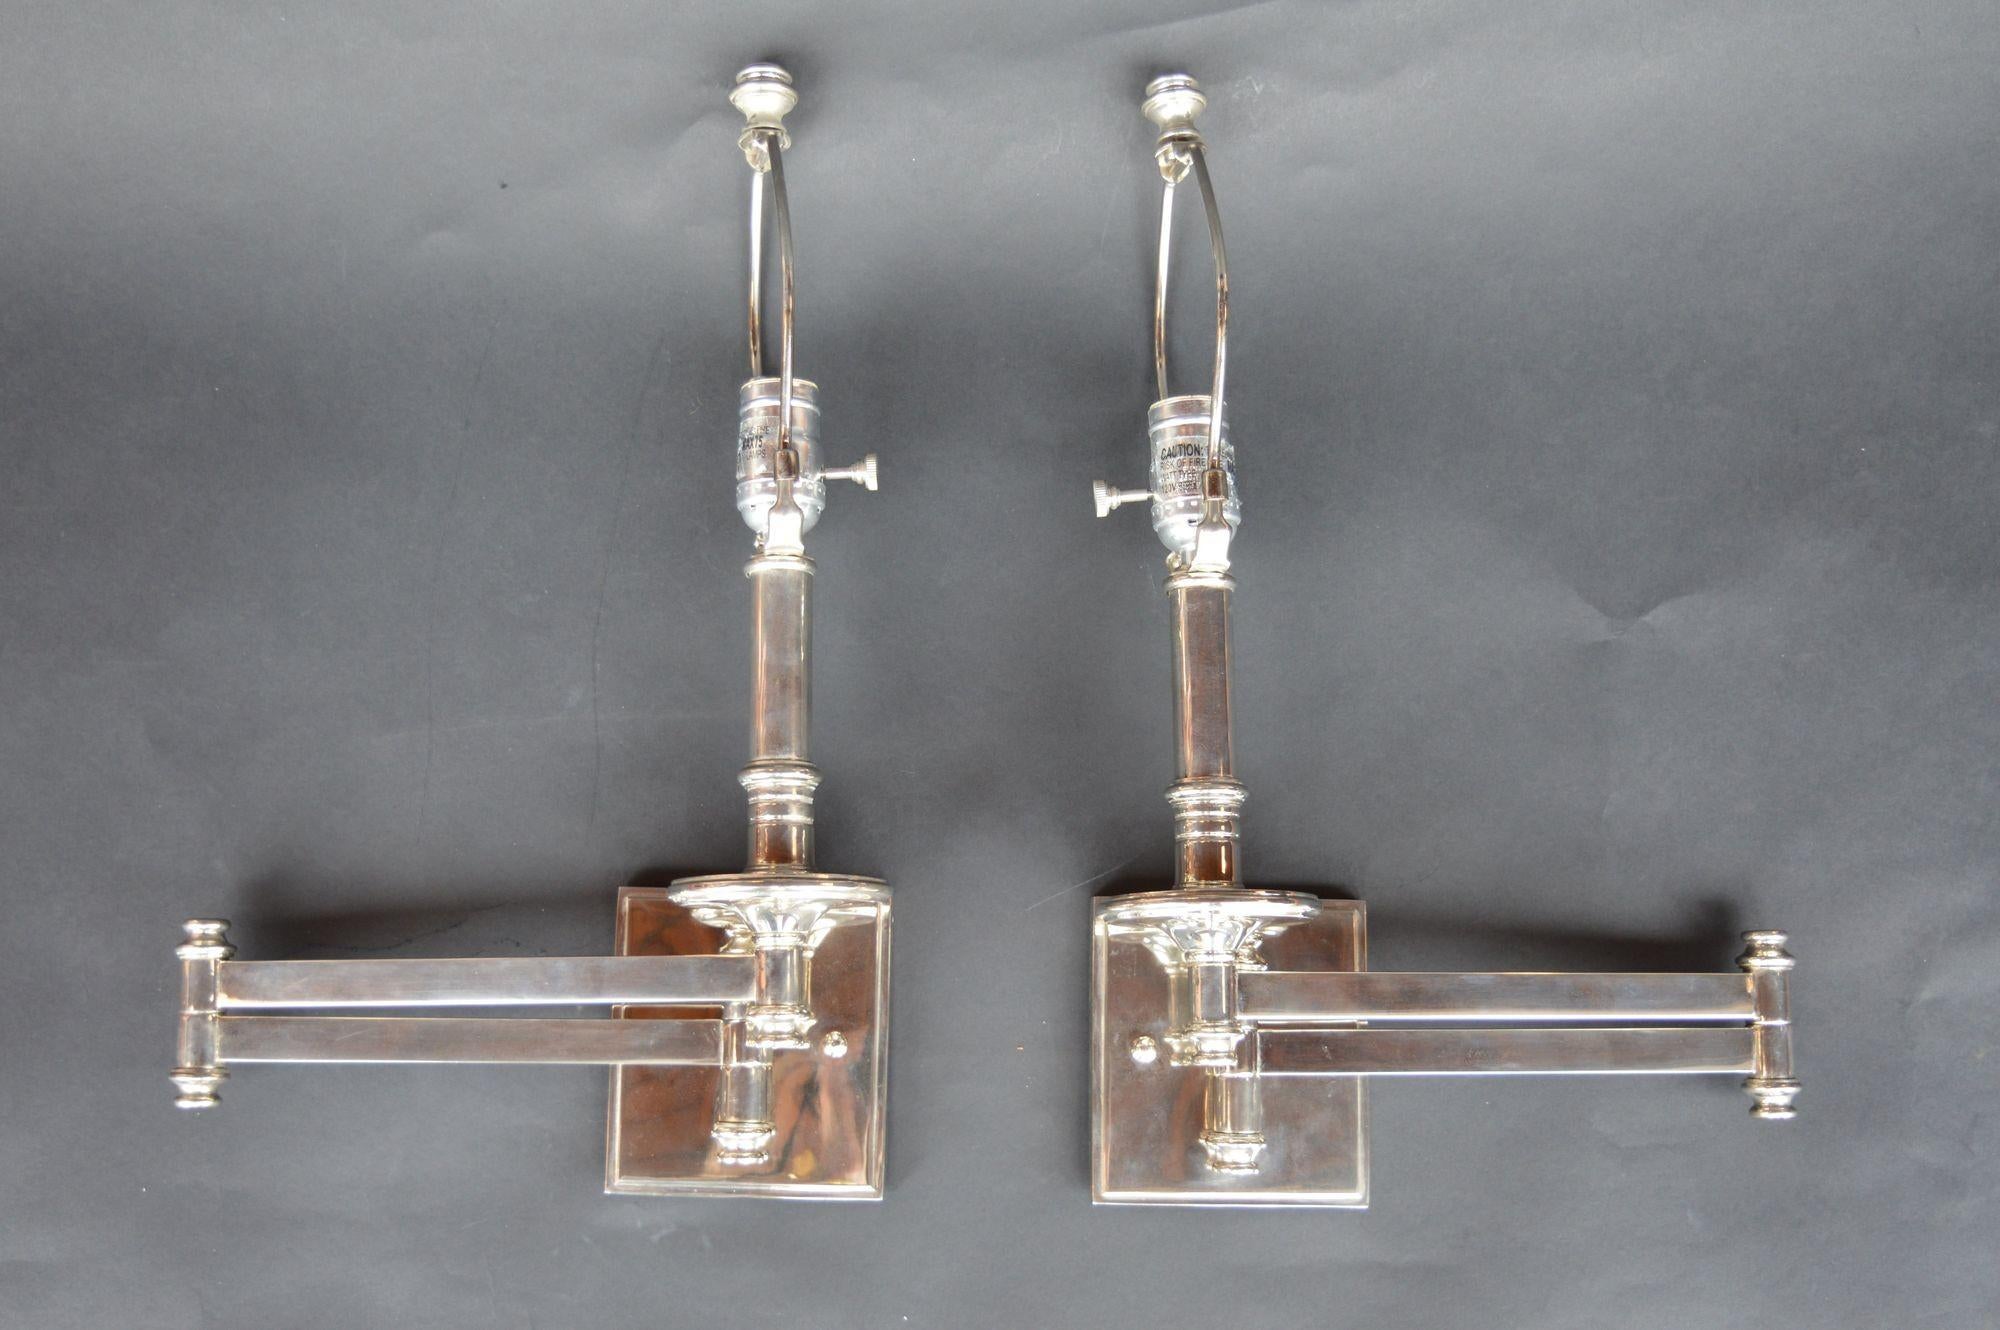 Pair of Nickel sconces with articulating arms. Measurements are with the arm fully extended.